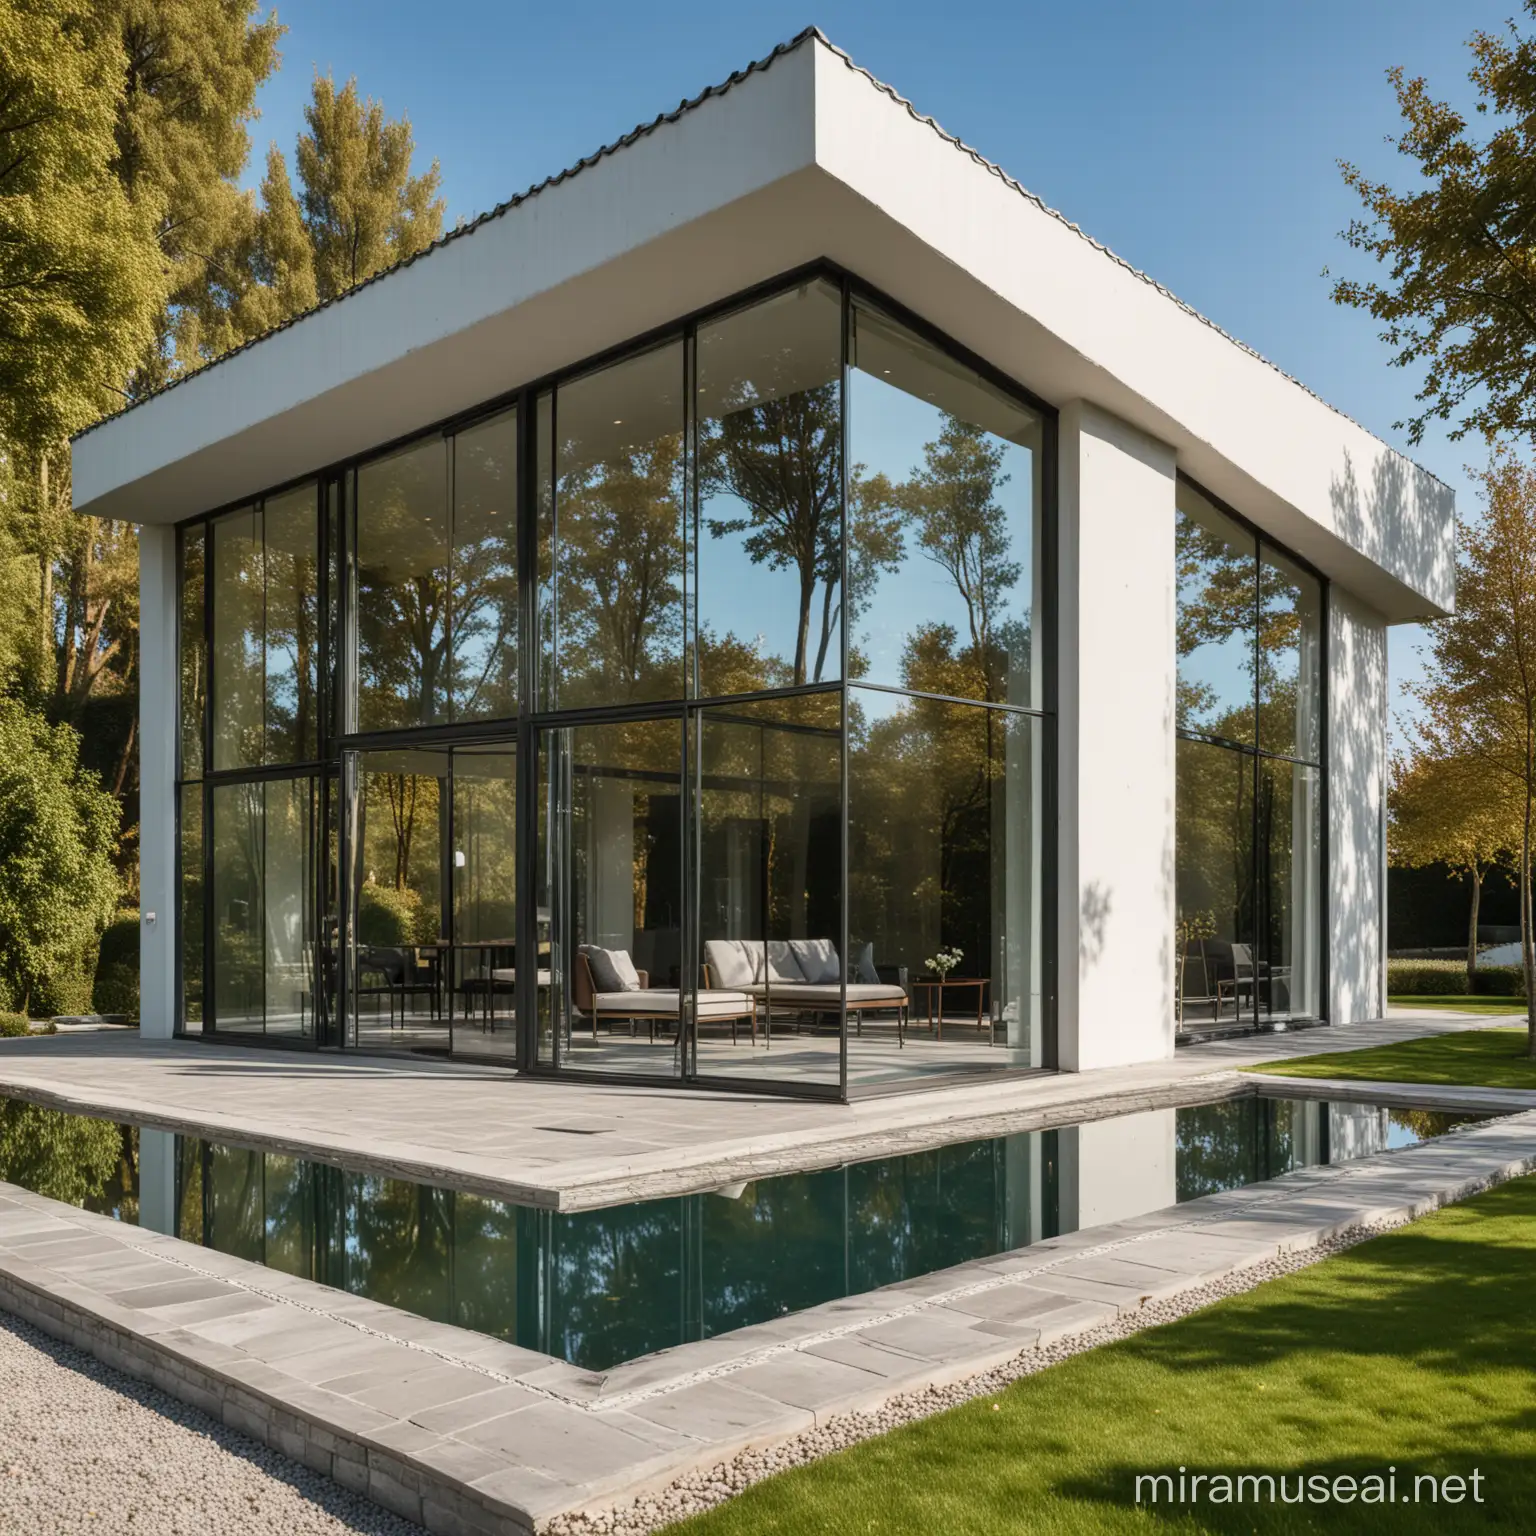 Villa with Mirror Reflections and Glass Windows